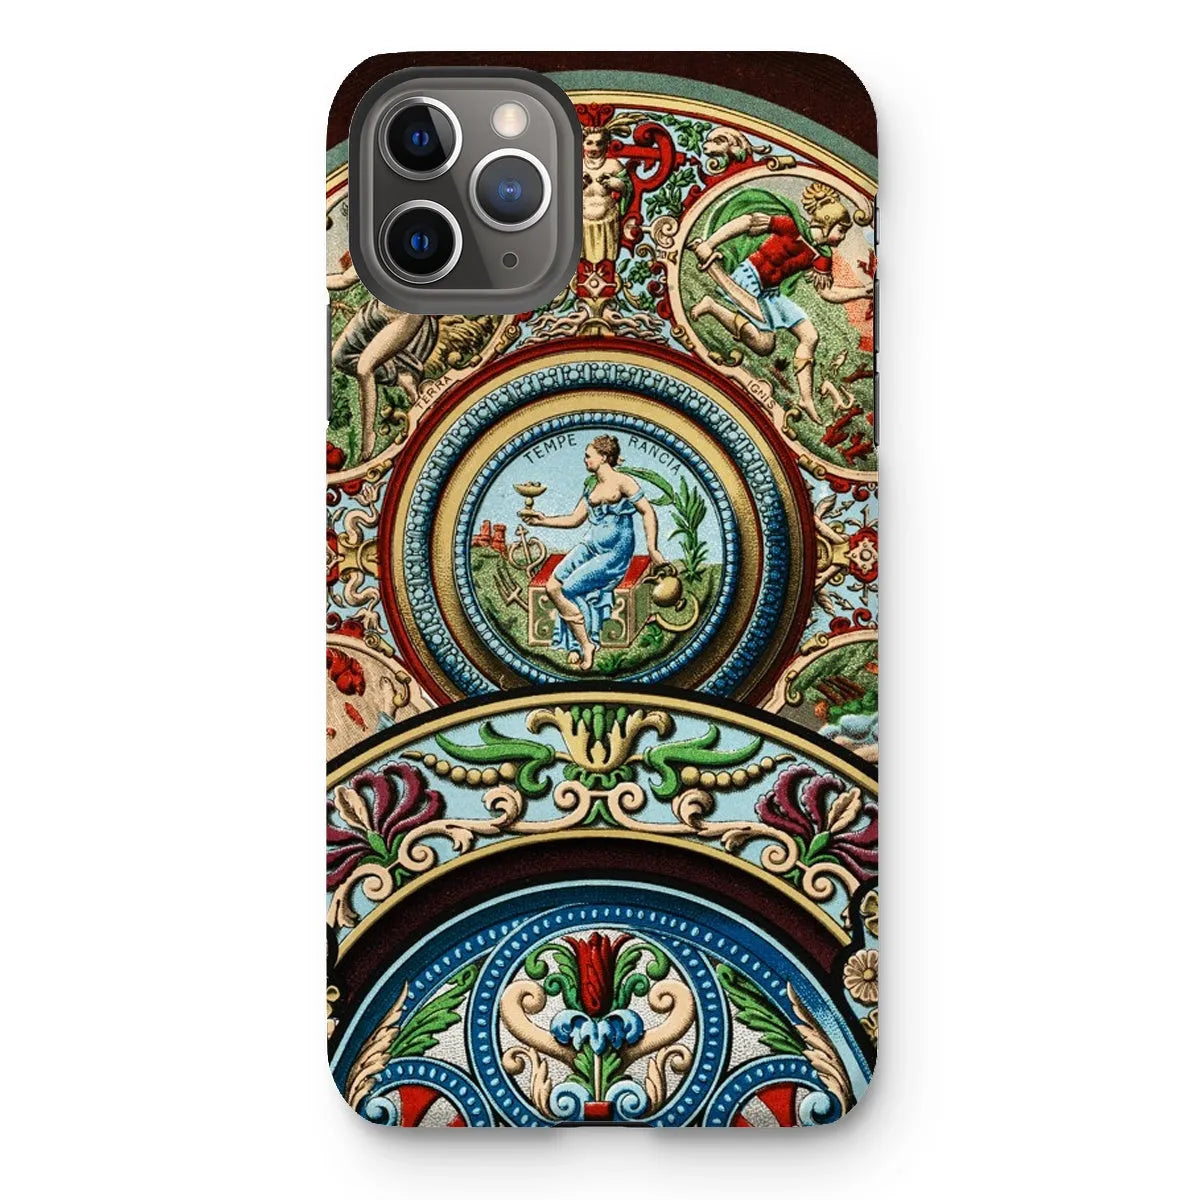 Another Renaissance Aesthetic Phone Case - Auguste Racinet - Iphone 11 Pro Max / Matte - Mobile Phone Cases - Aesthetic